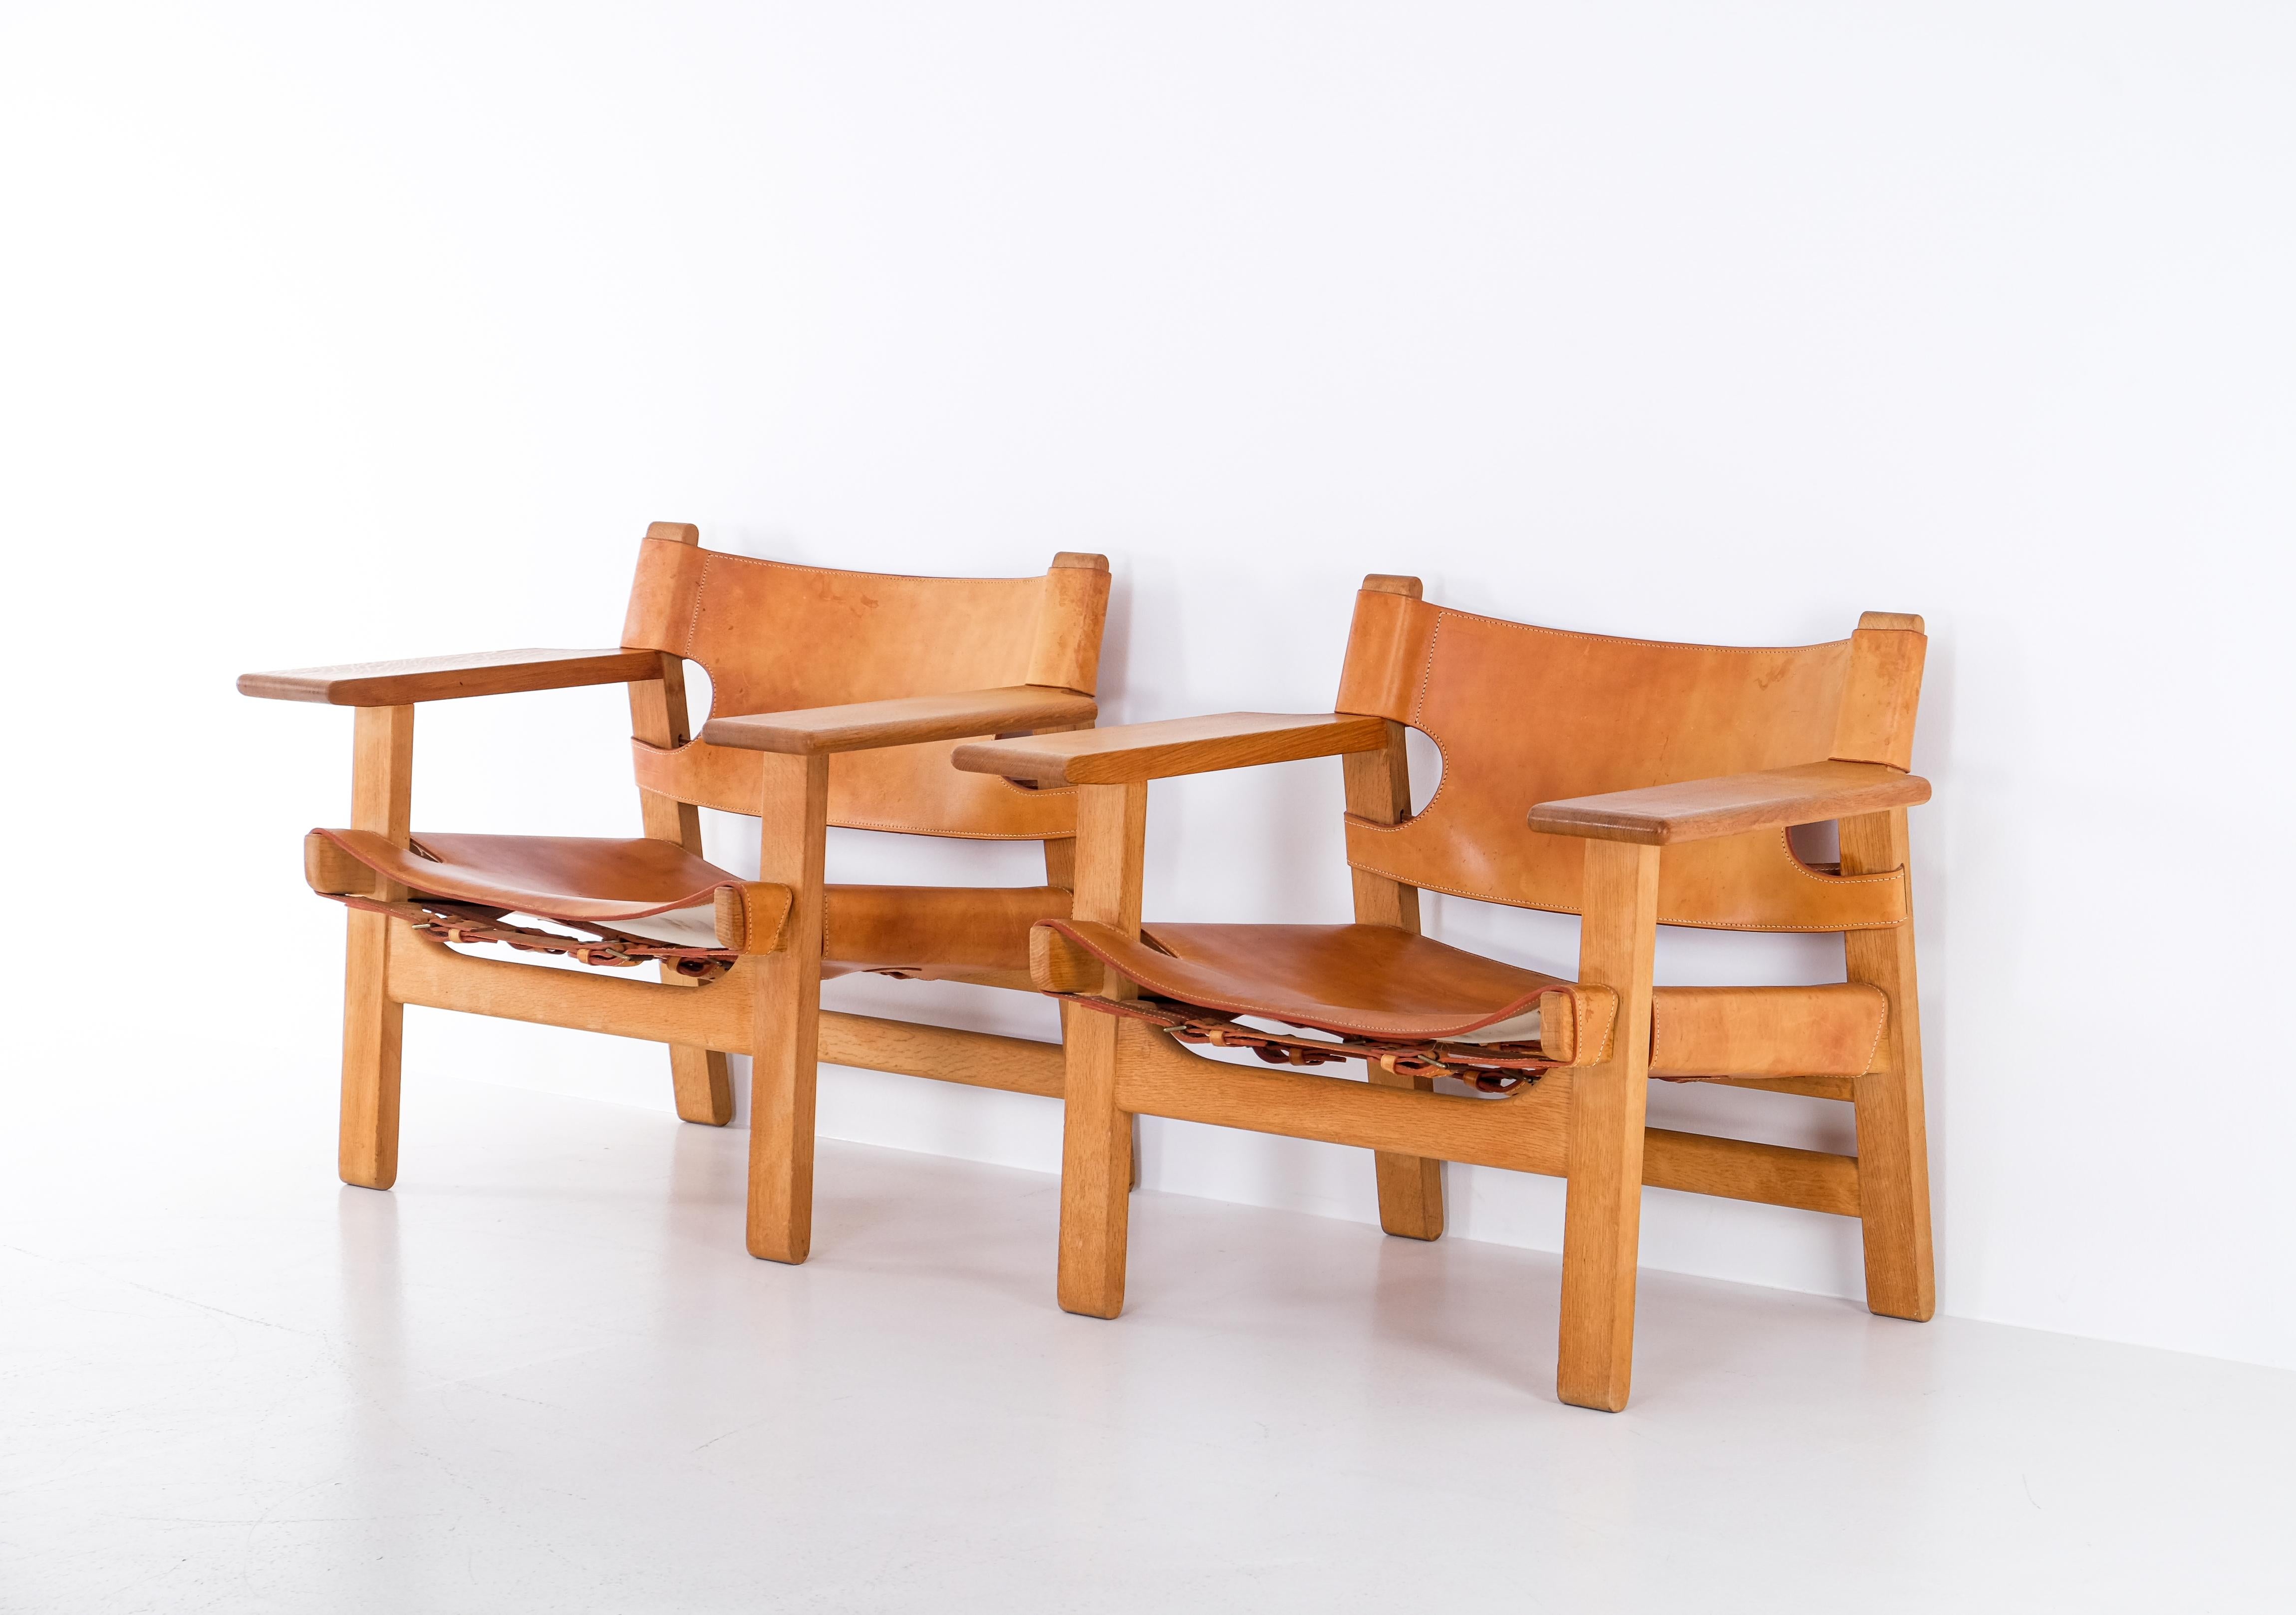 Pair of Spanish Chairs by Børge Mogensen, 1960s For Sale 1